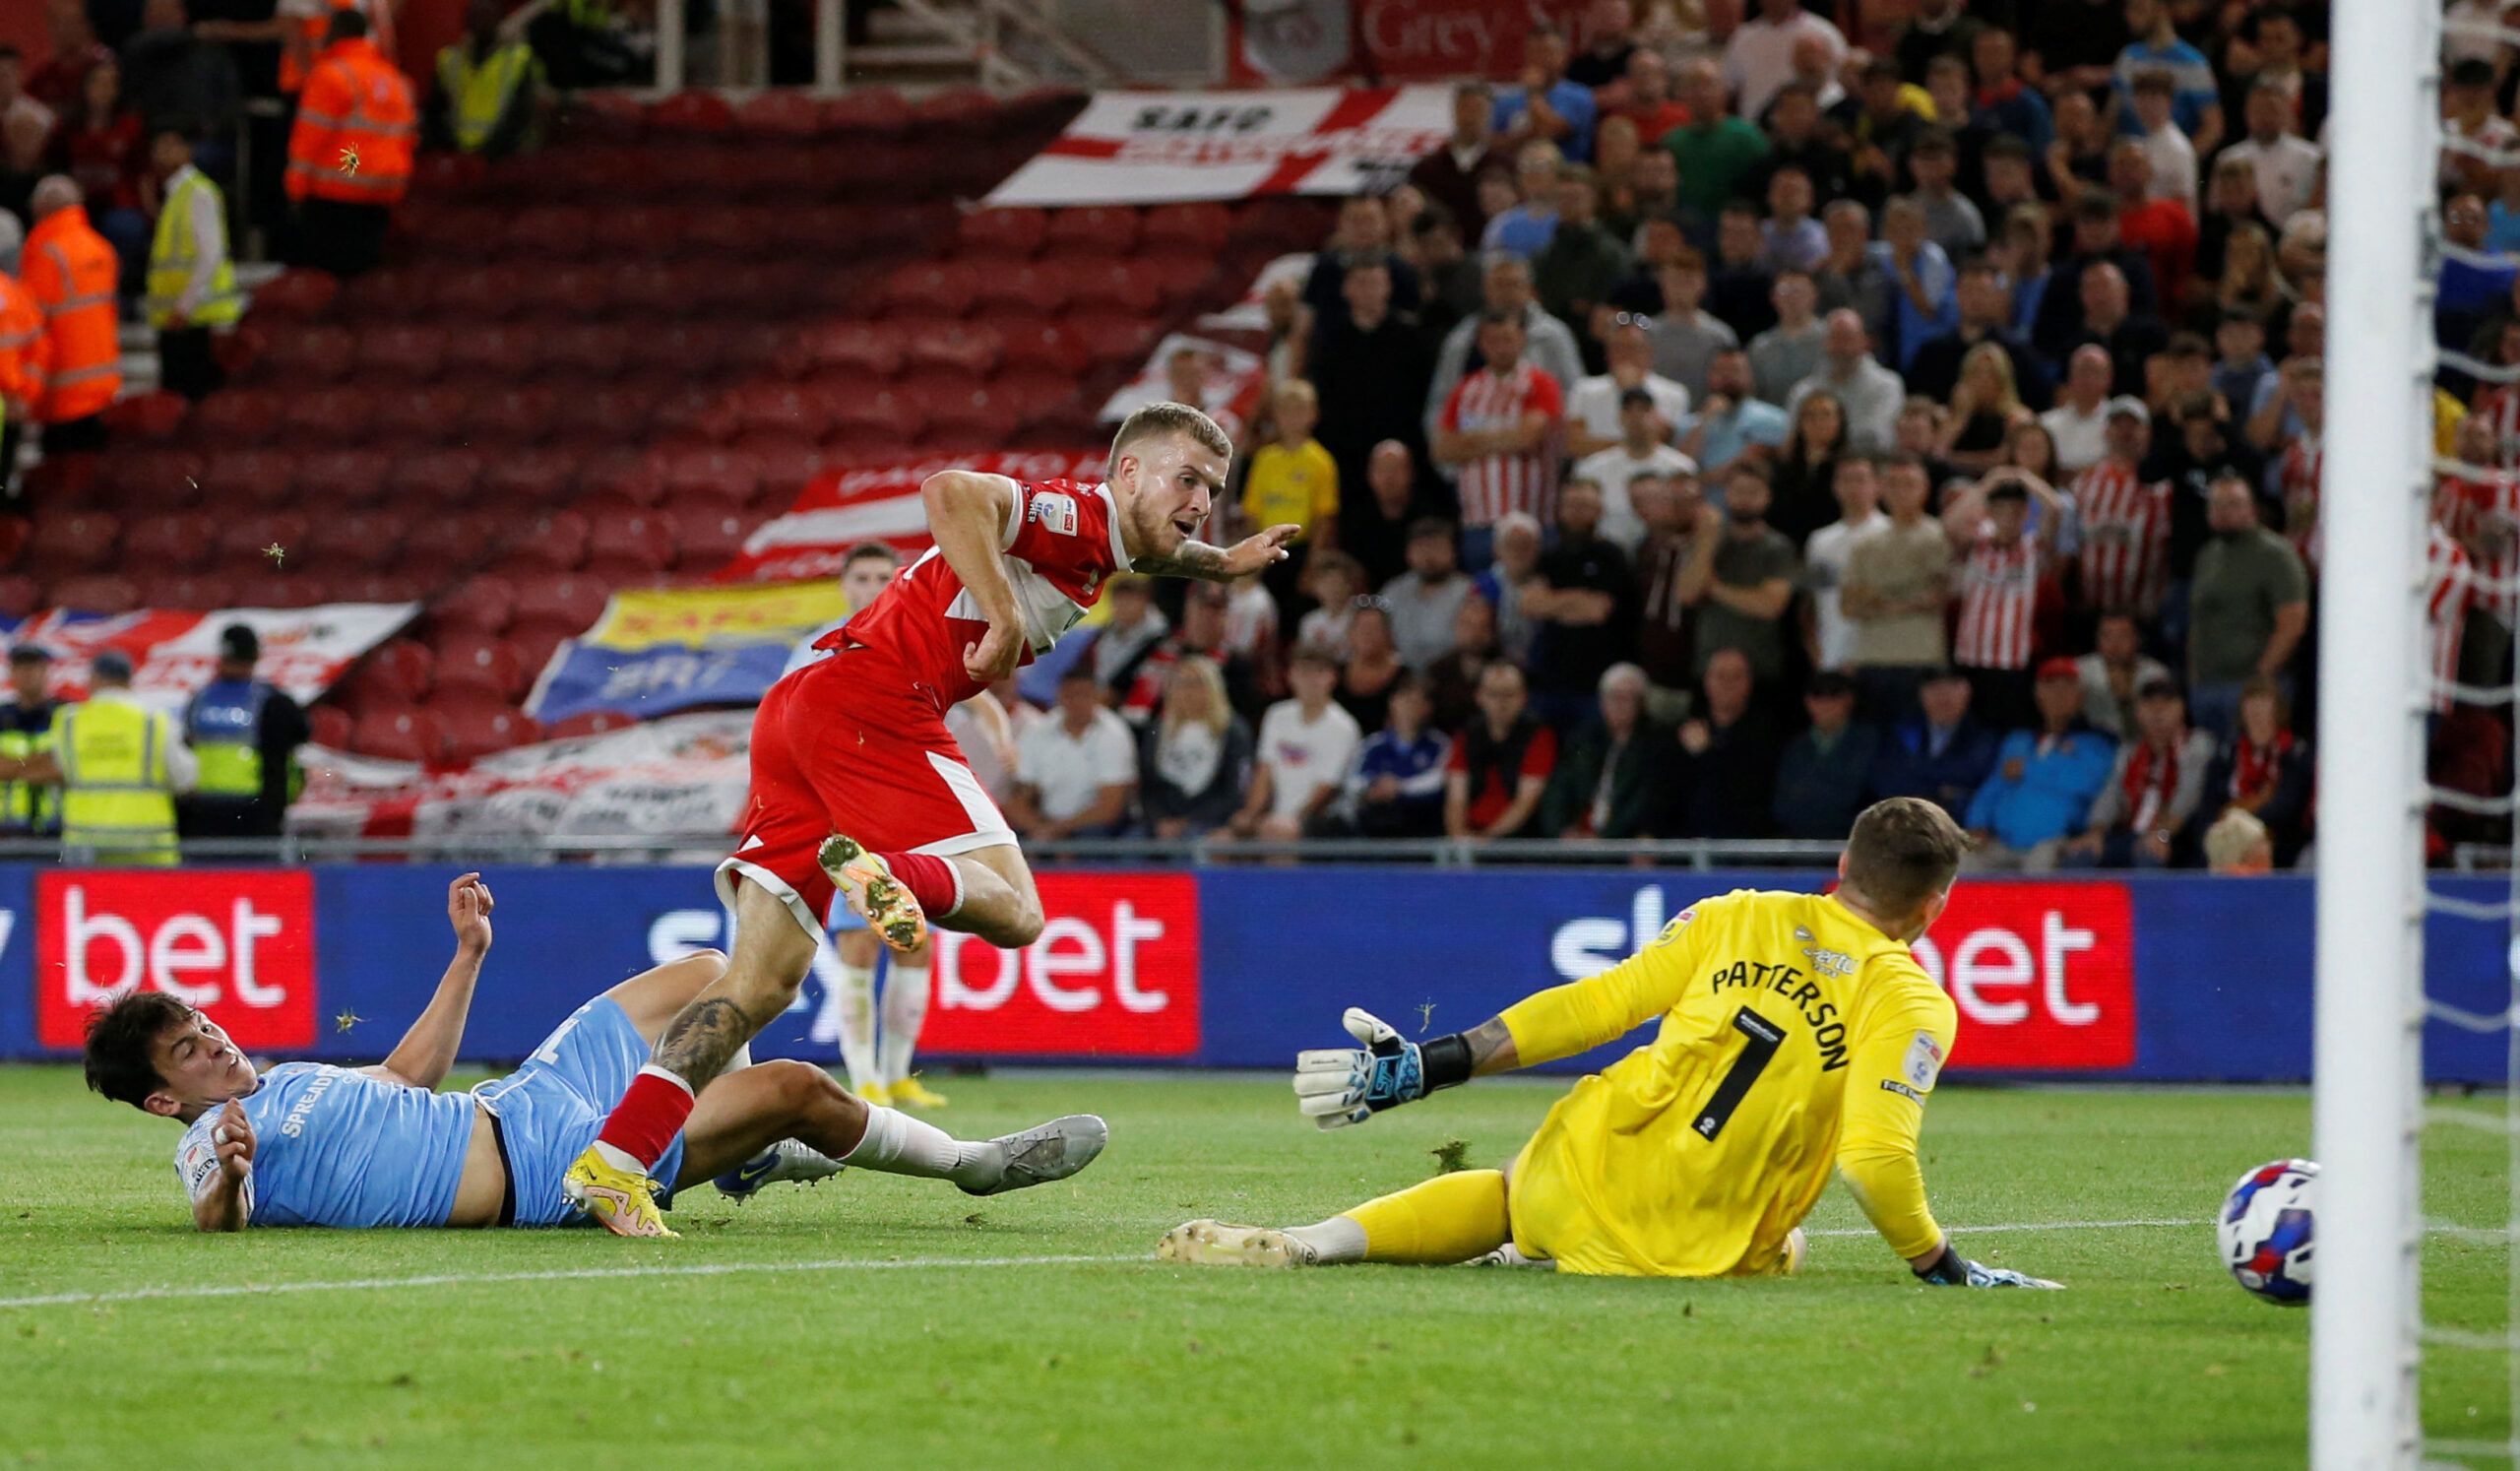 Soccer Football - Championship - Middlesbrough v Sunderland - Riverside Stadium, Middlesbrough, Britain - September 5, 2022  Middlesbrough's Riley McGree scores their first goal  Action Images/Ed Sykes  EDITORIAL USE ONLY. No use with unauthorized audio, video, data, fixture lists, club/league logos or 